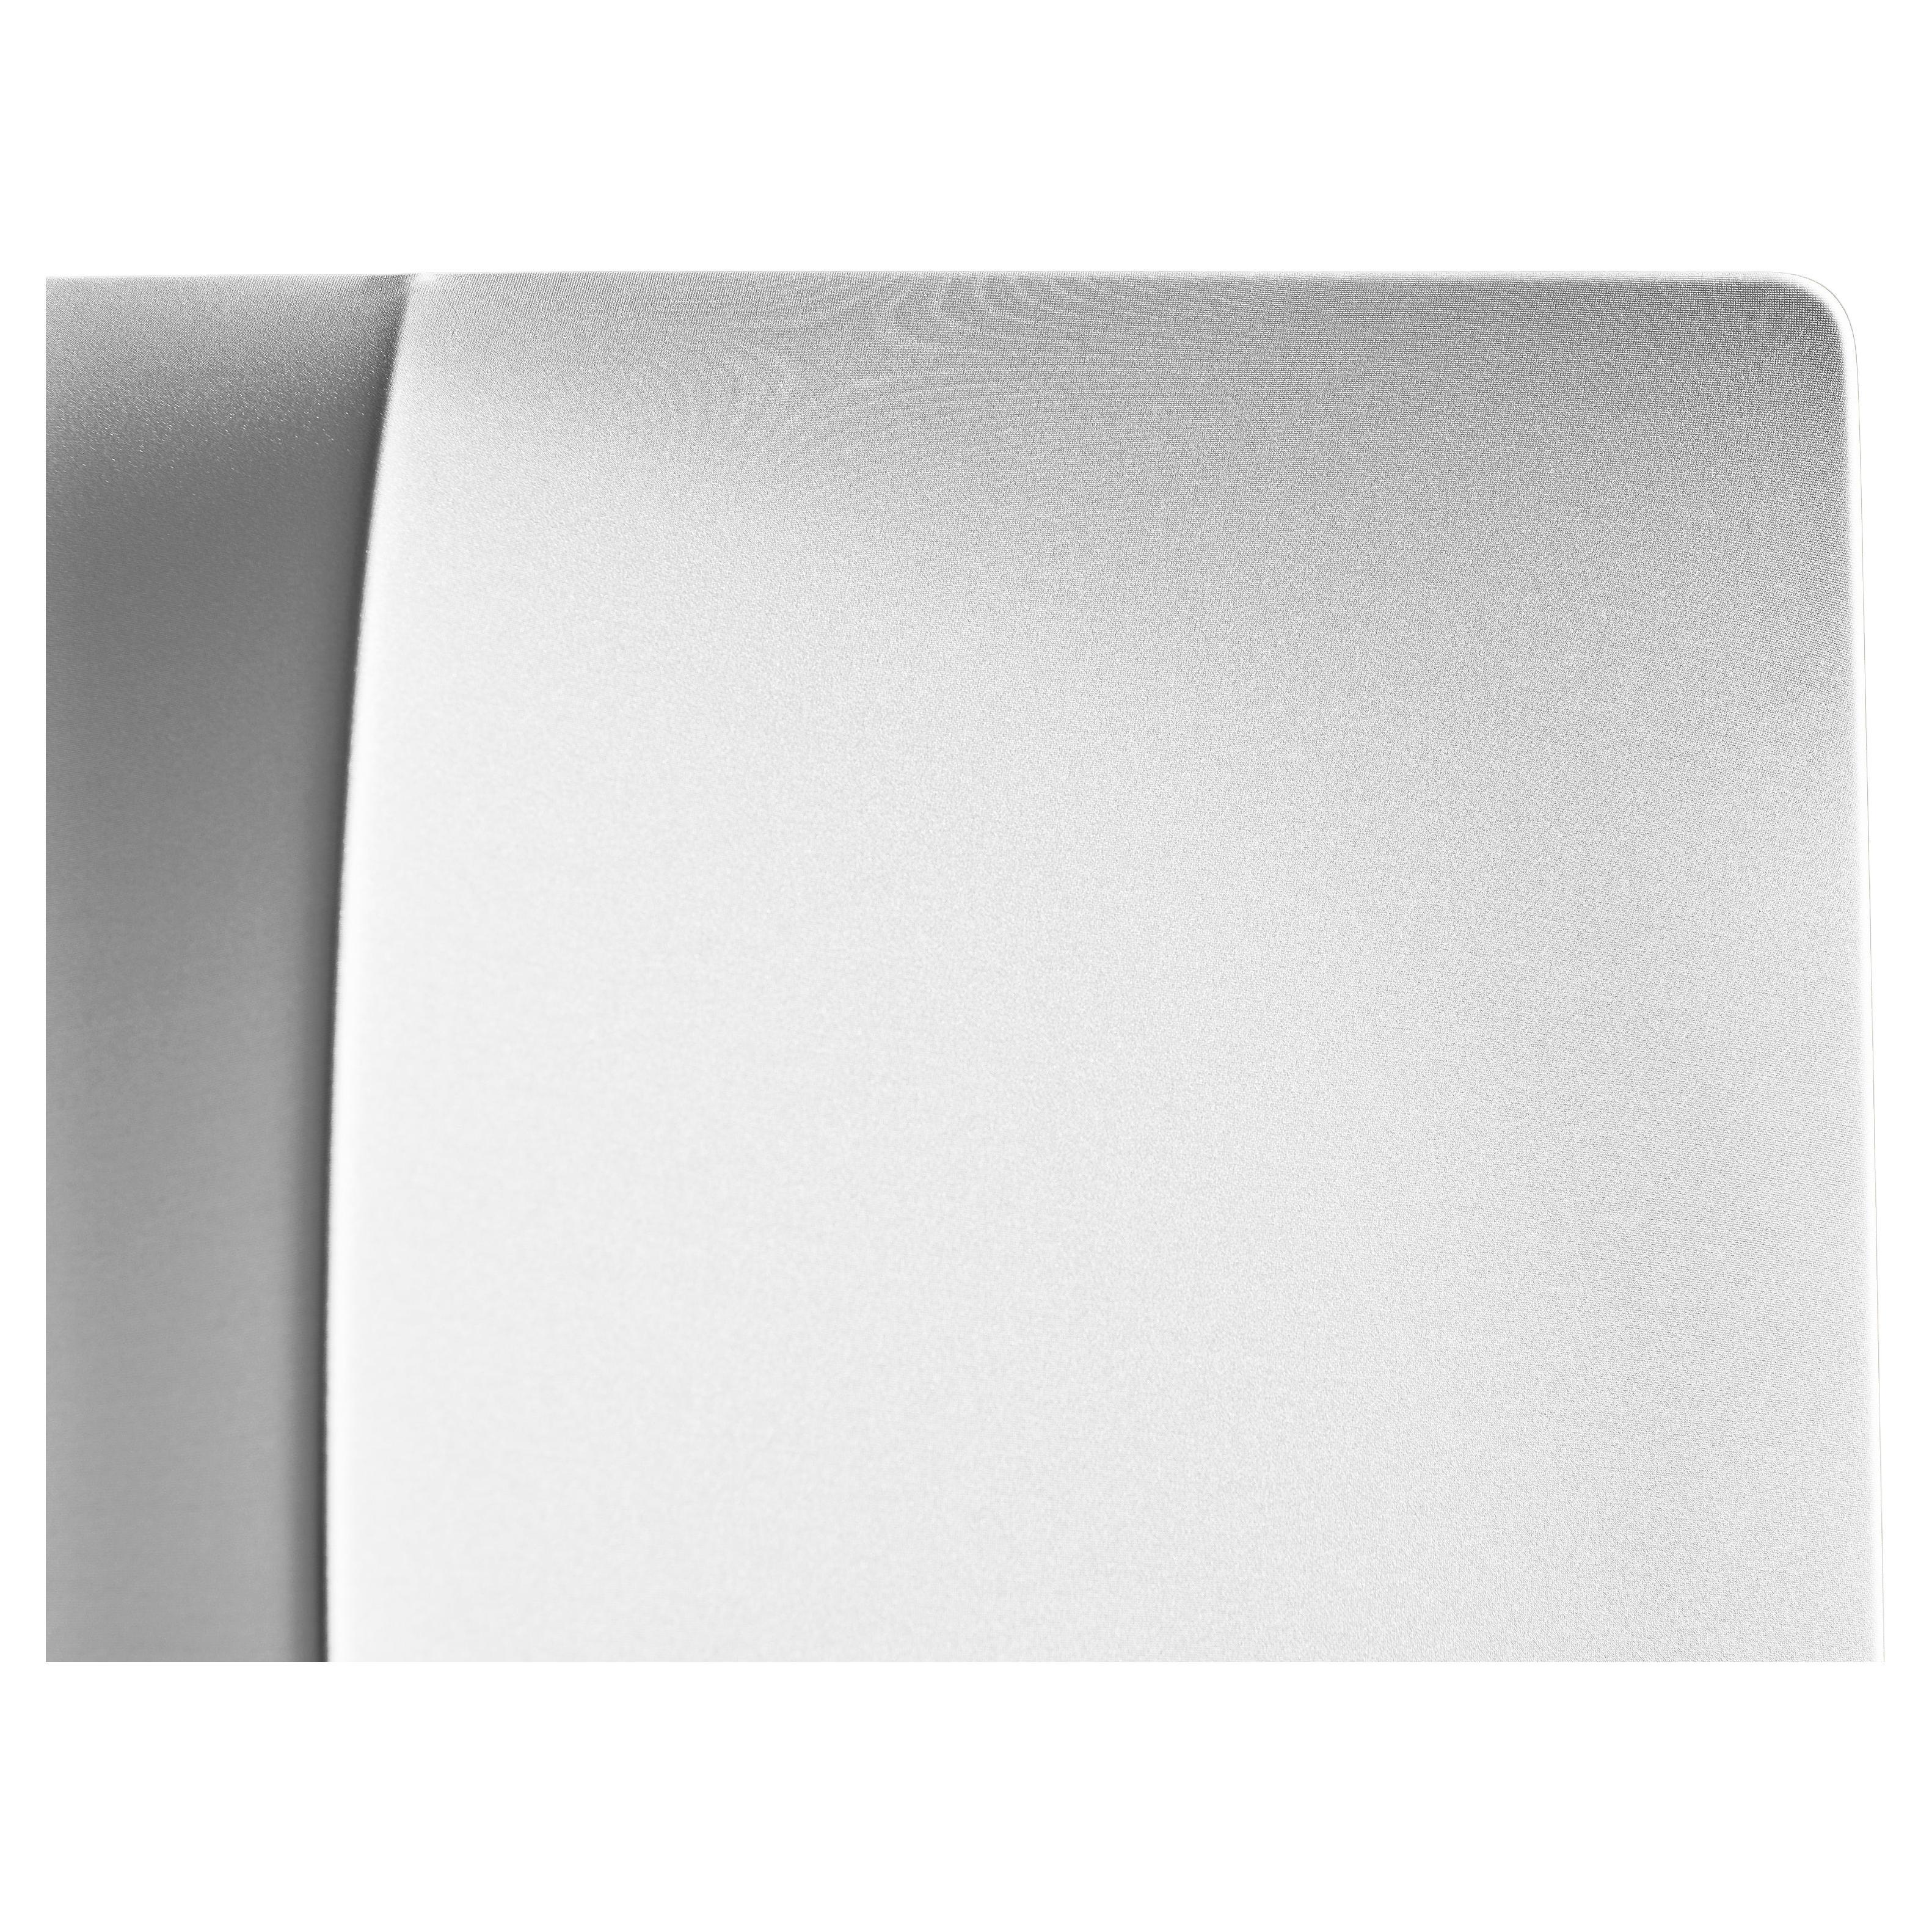 Axolight Medium 100 Nelly Wall Lamp in White by Manuel & Vanessa Vivian For Sale